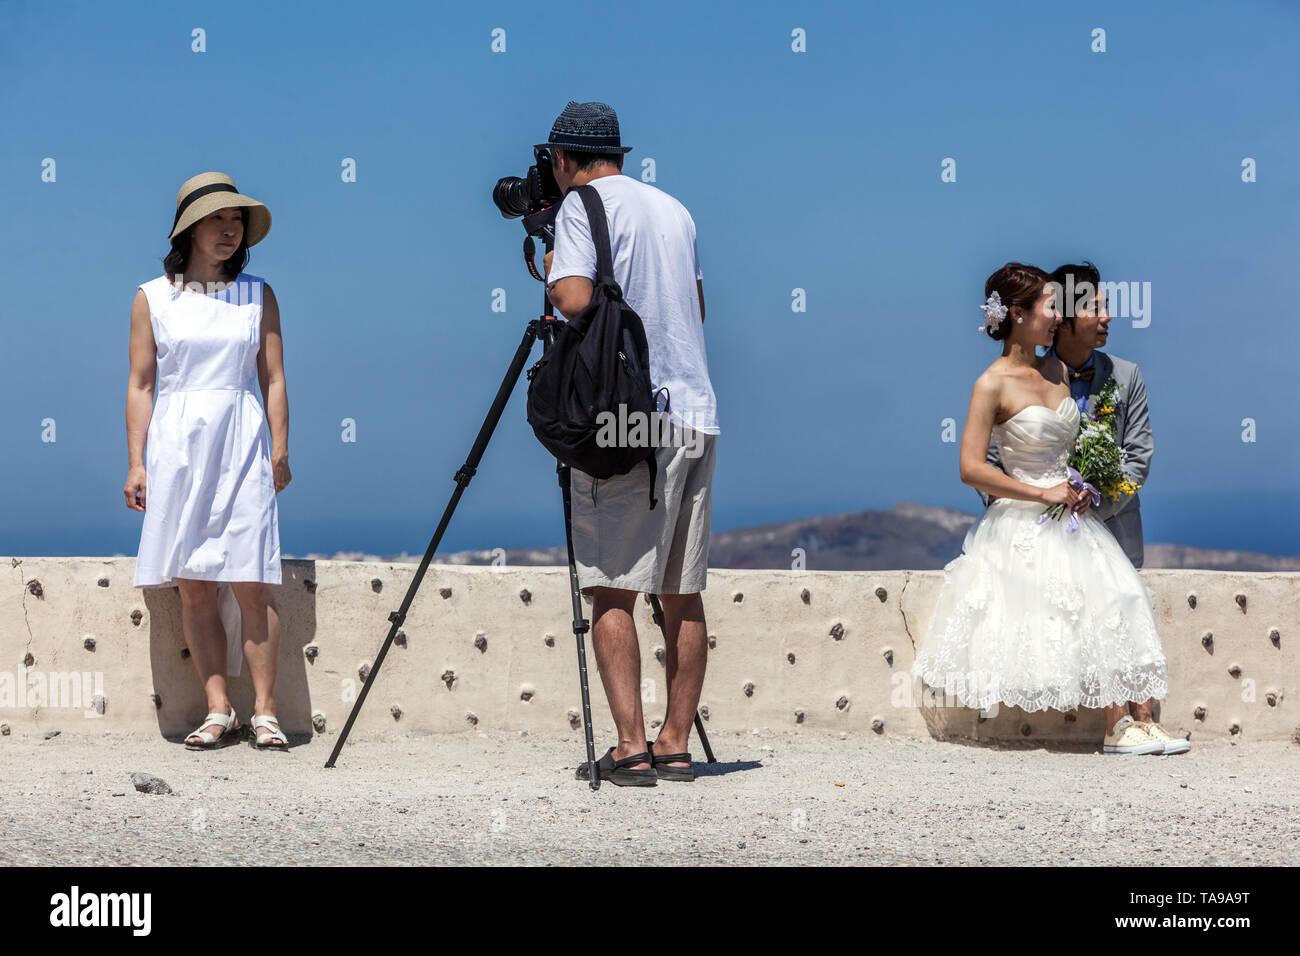 Santorini, Tourists above the sea on the terrace, Man making photo with tripod. Just married young Asian people, Greece Europe Stock Photo